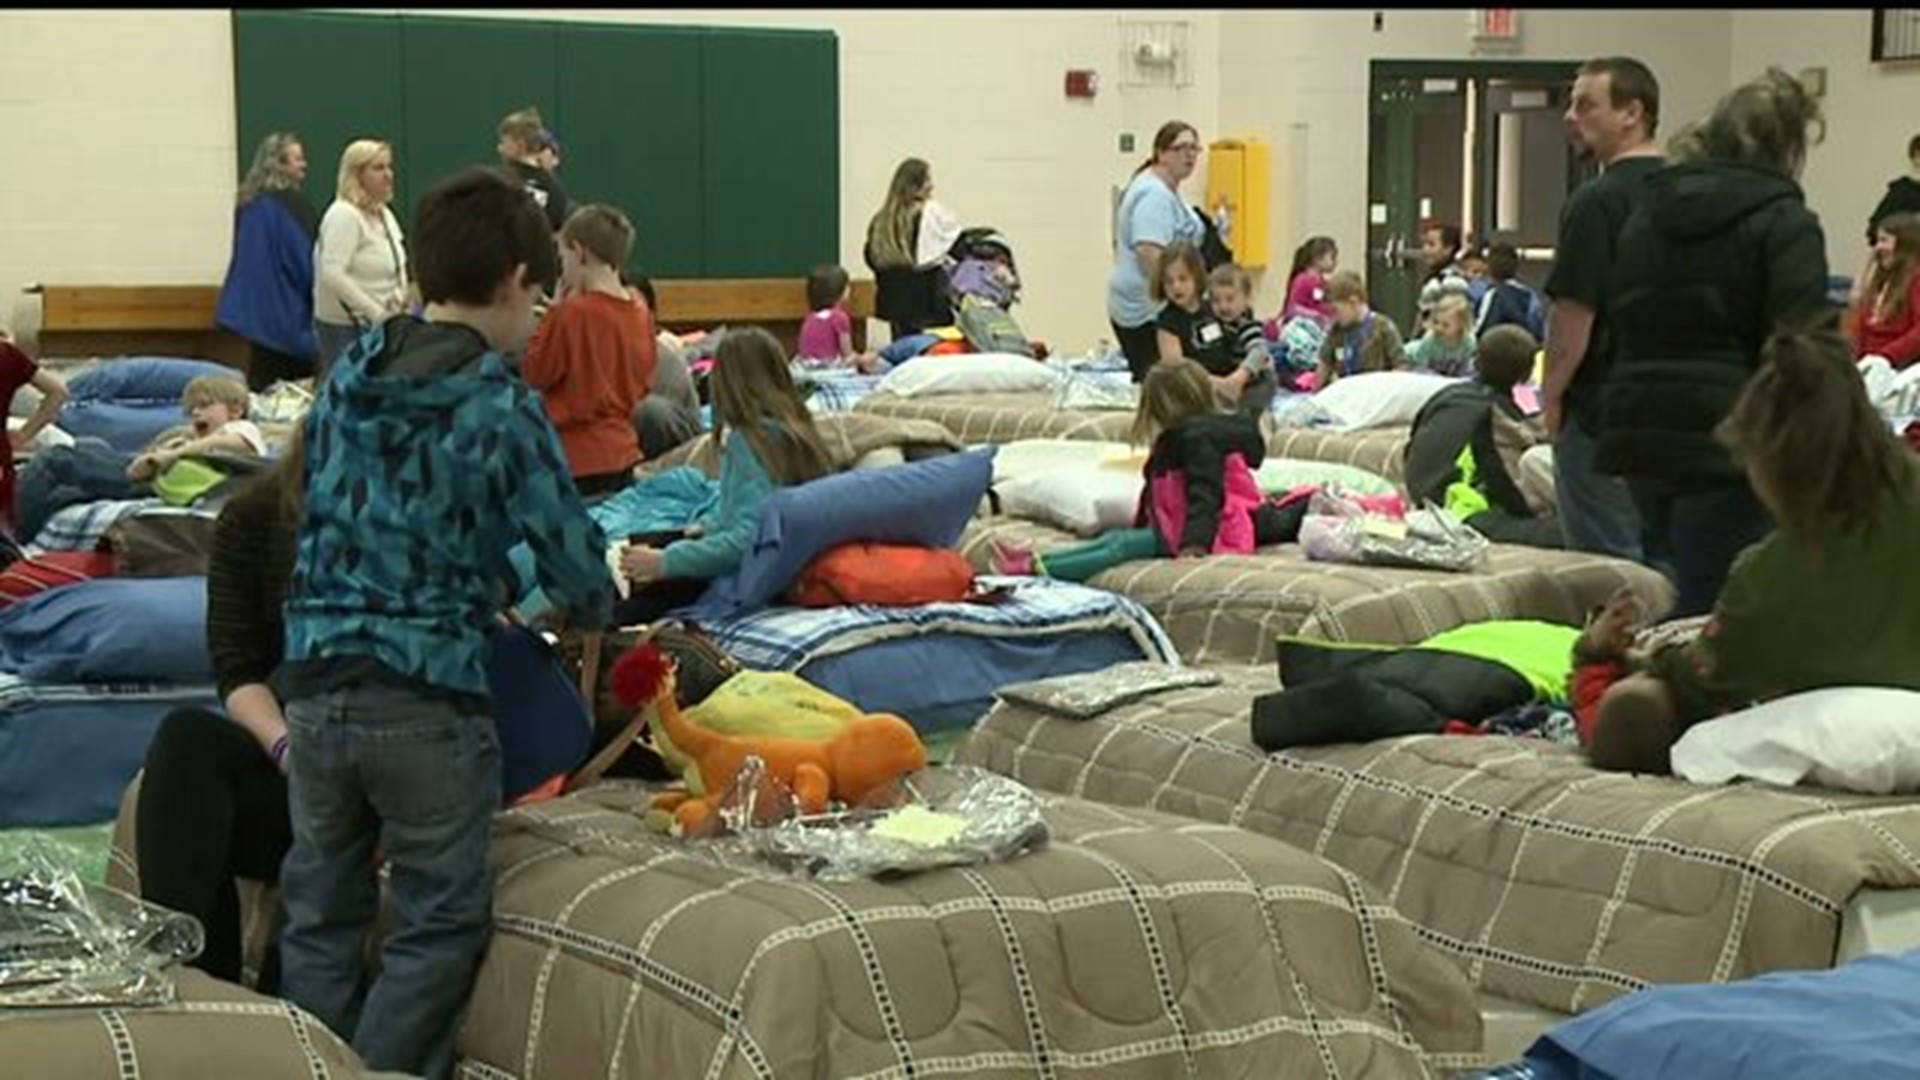 80 beds for 80 kids